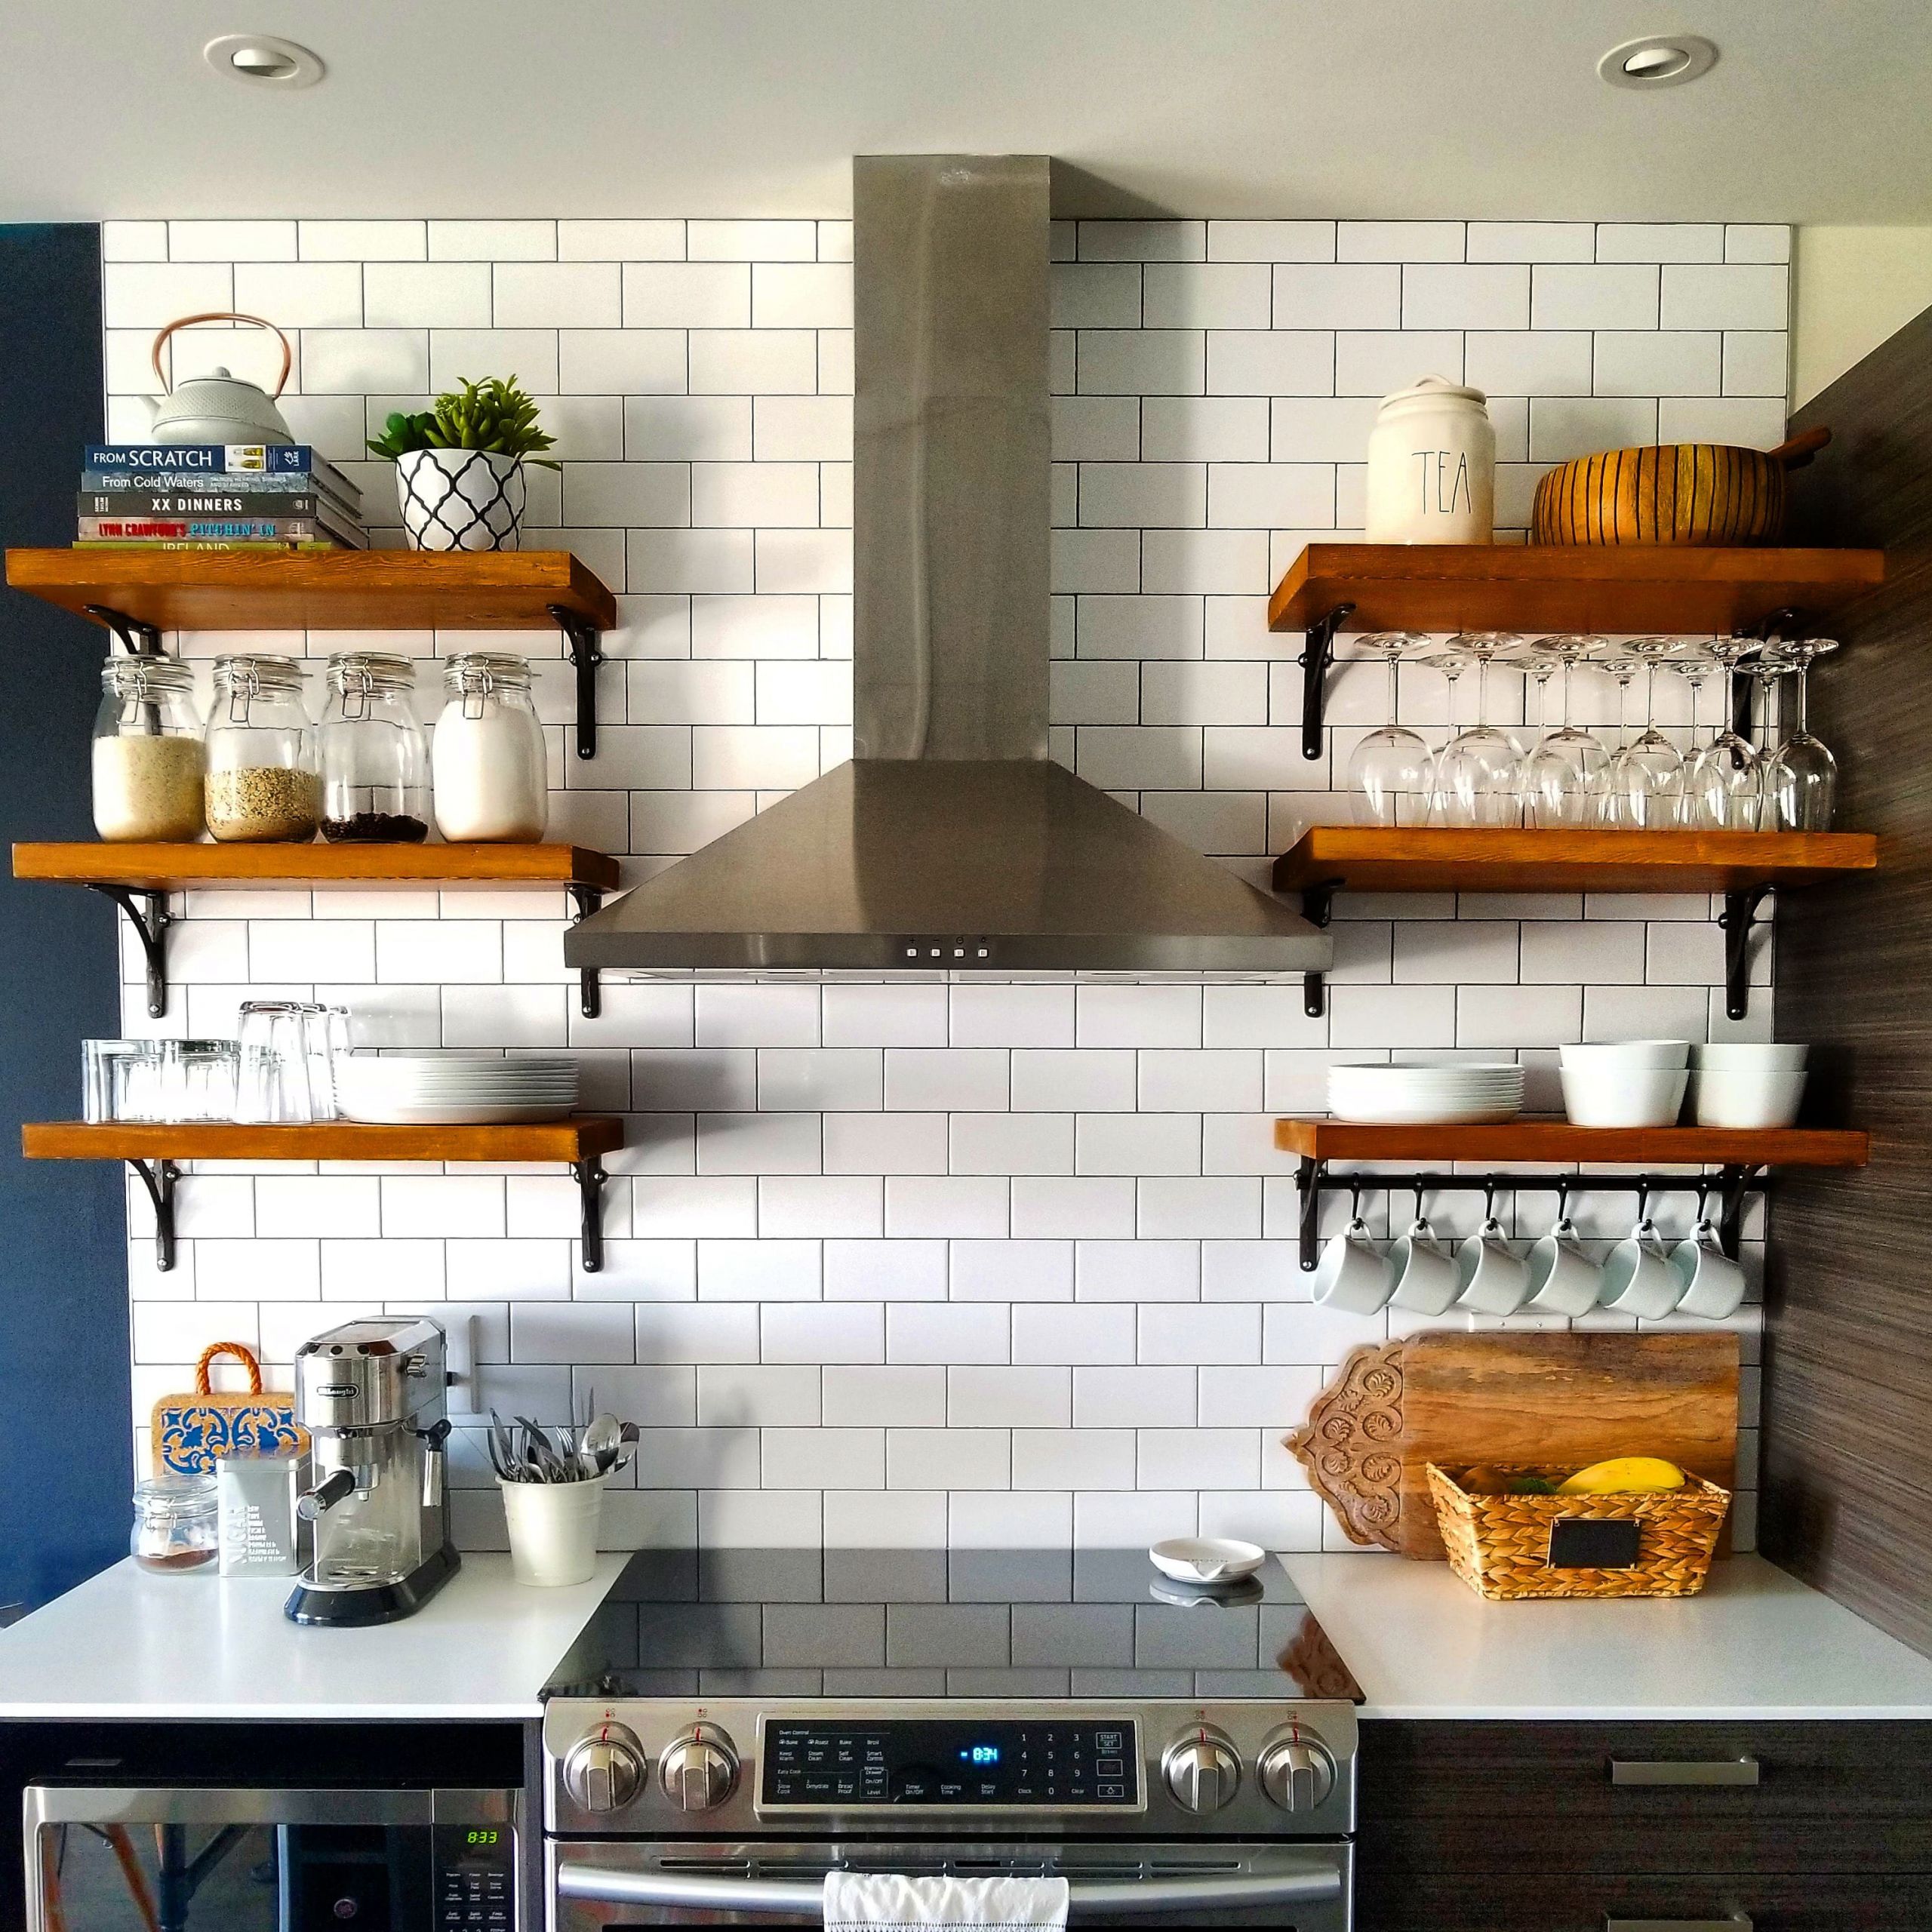 Kitchen Cabinet Storage Shelf
 Open Kitchen Shelving How to Build and Mount Kitchen Shelves